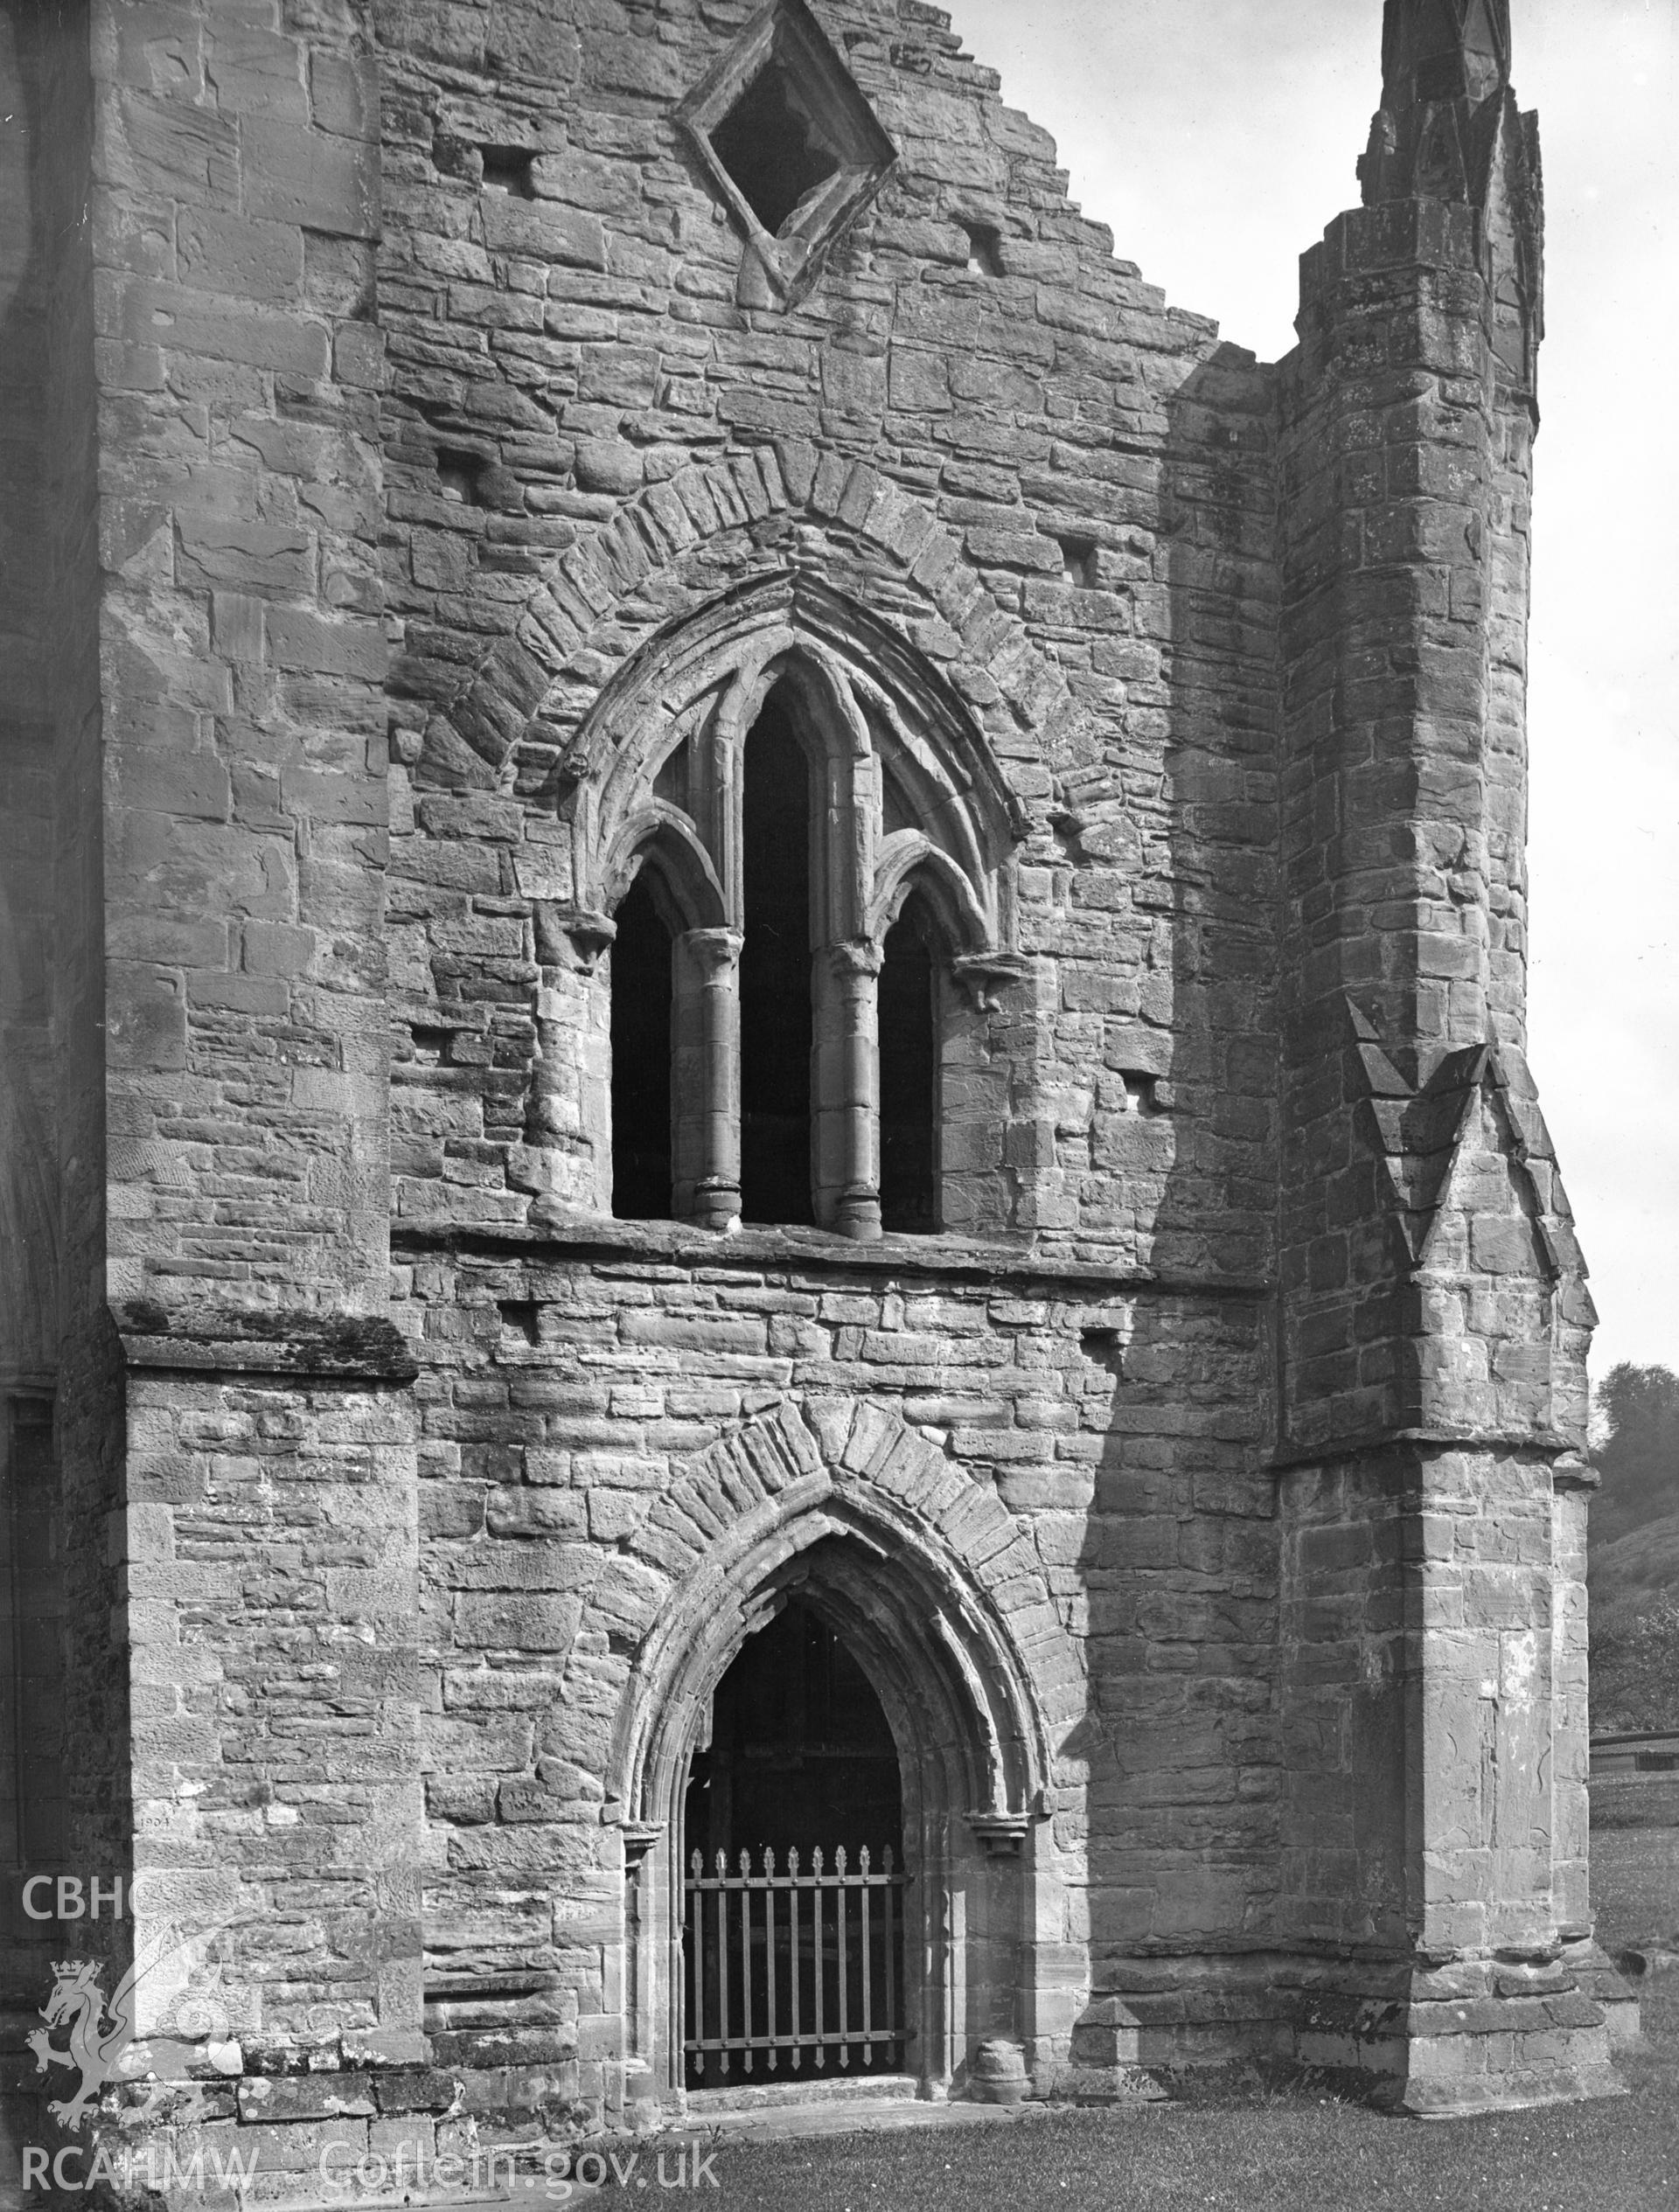 Digital copy of a photograph showing the south aisle west end at Tintern Abbey, taken by F H Crossley, c.1948.